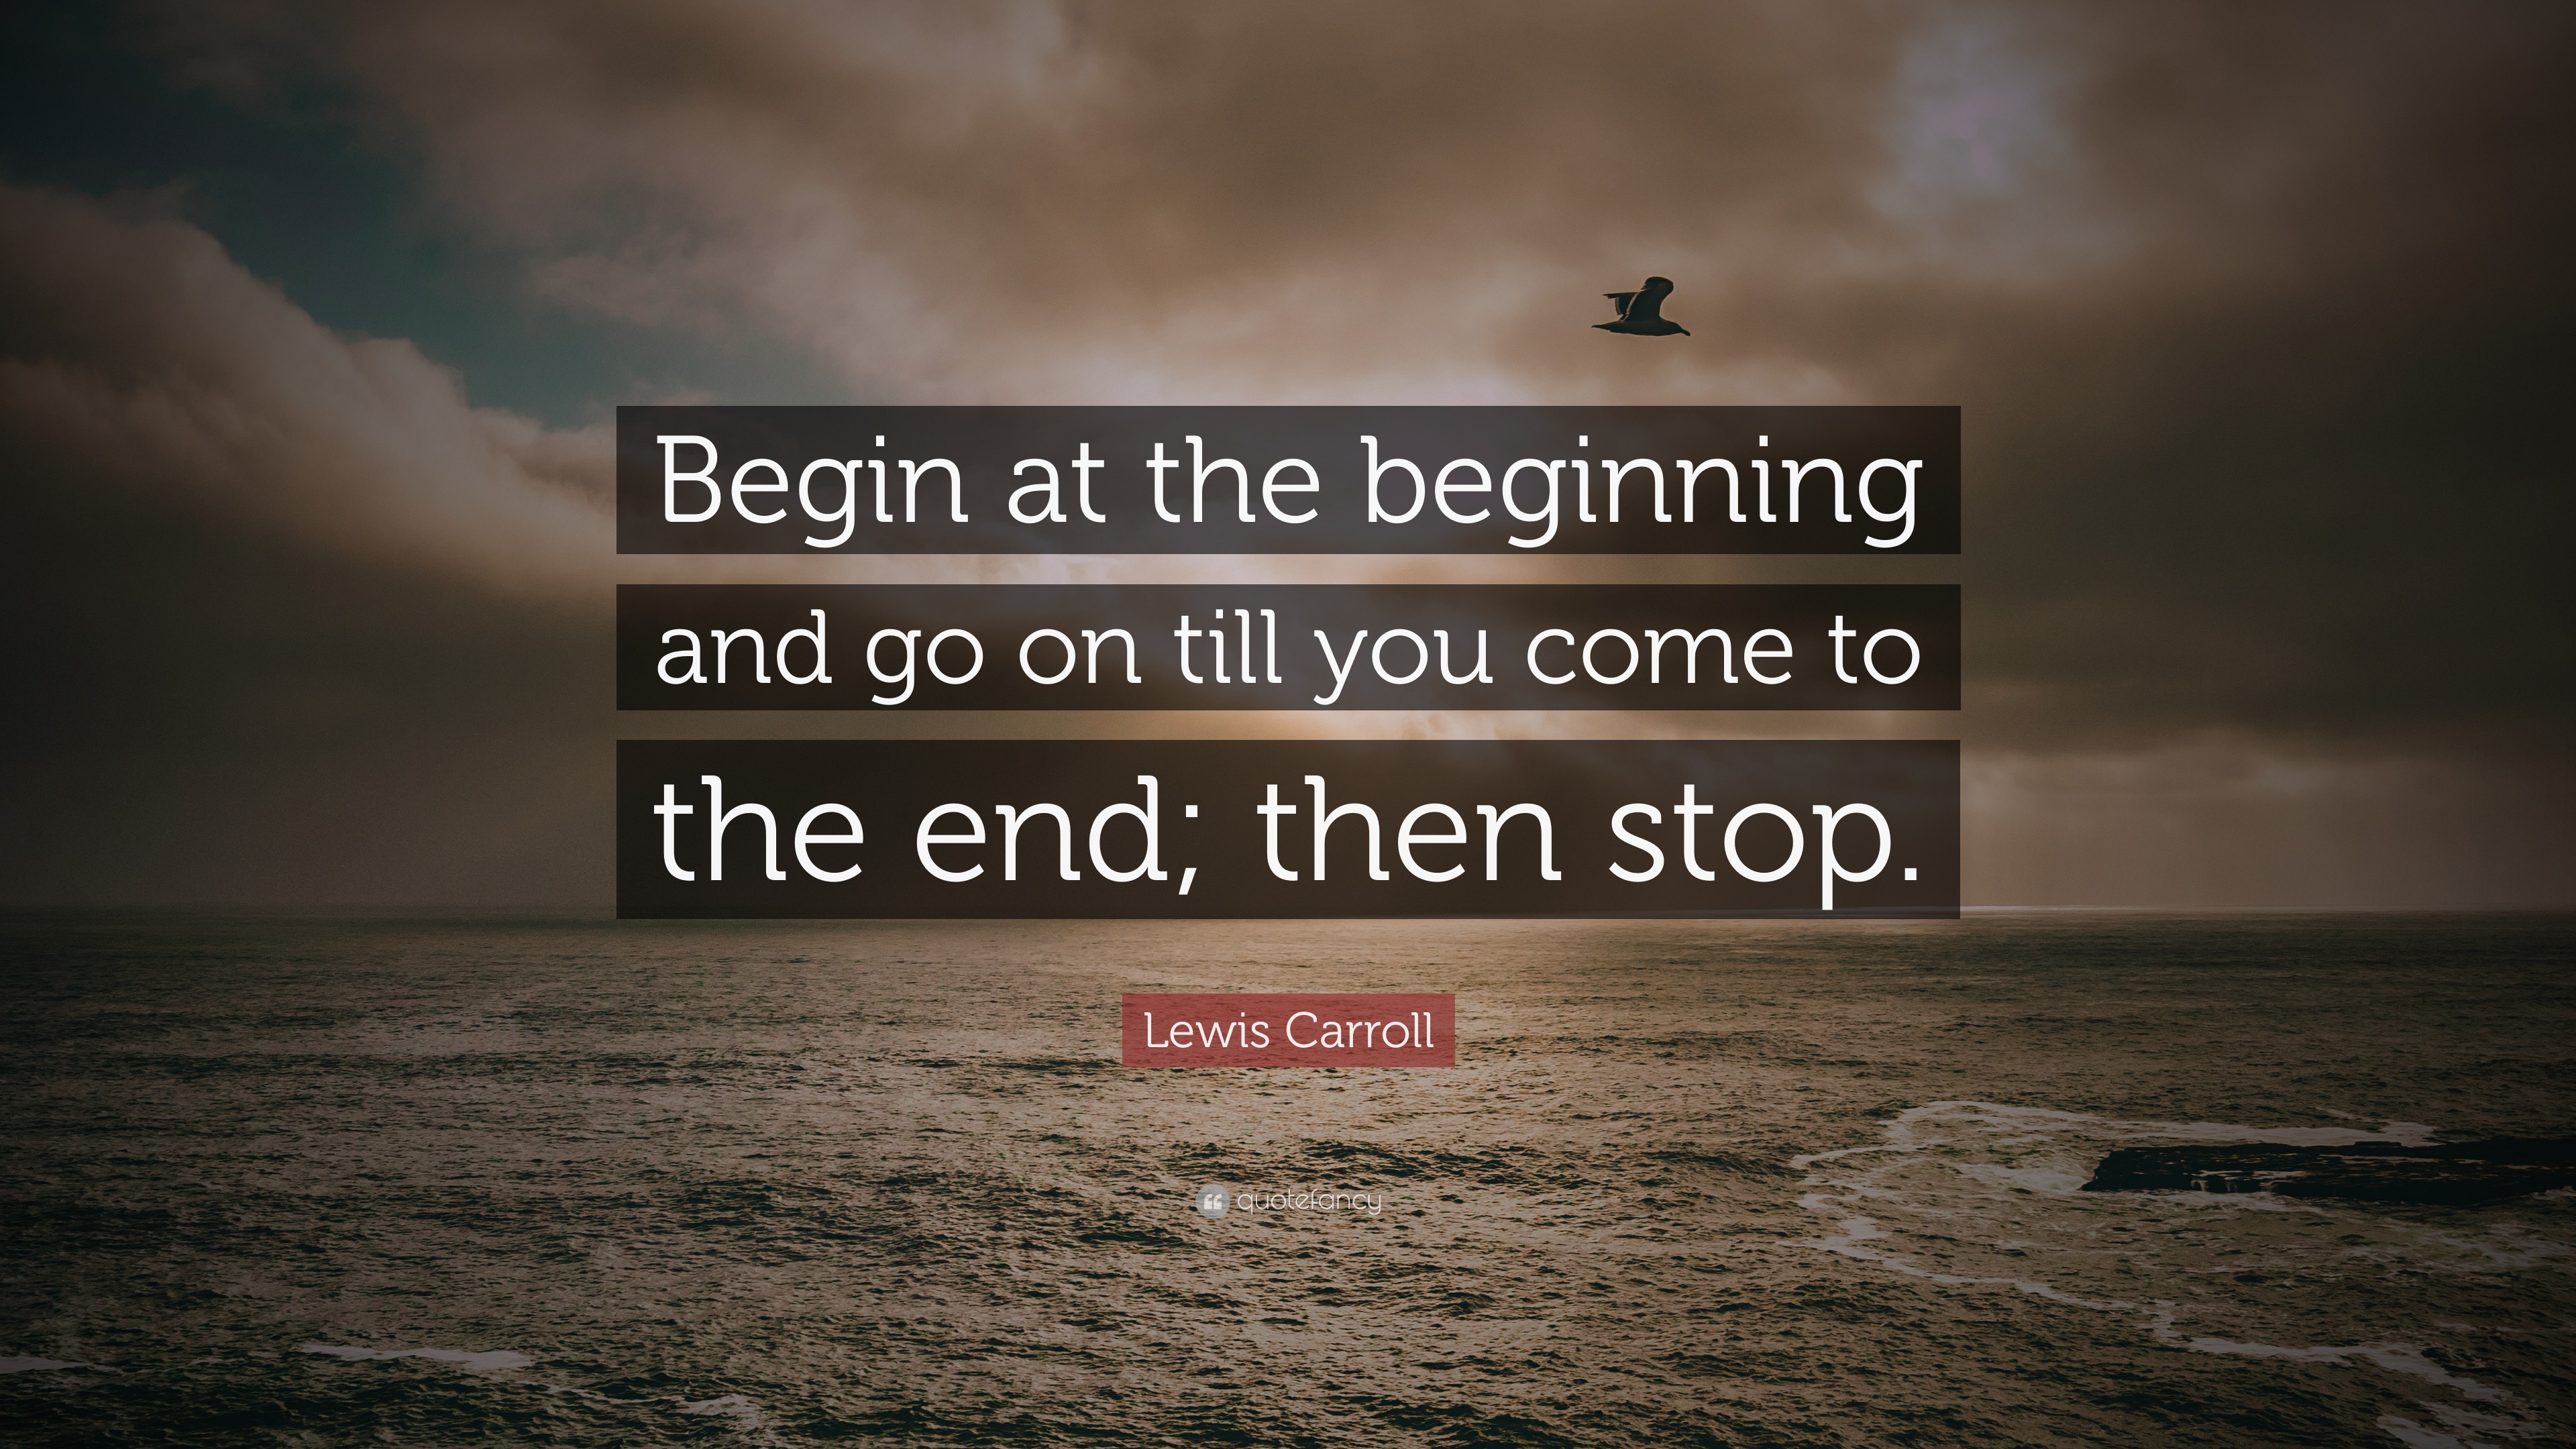 Lewis Carroll Quote: “Begin at the beginning and go on till you